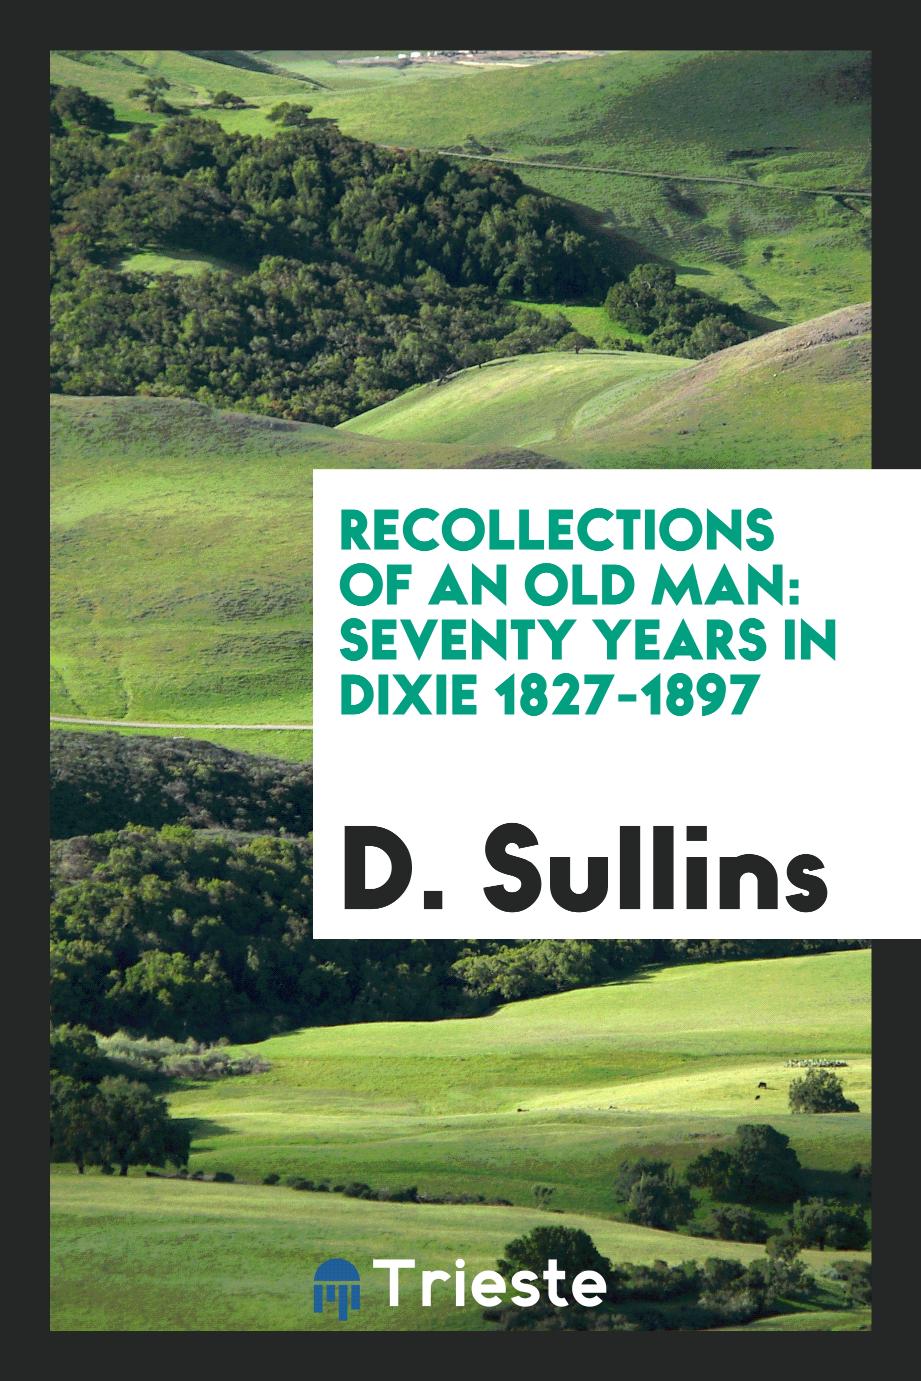 Recollections of an old man: seventy years in Dixie 1827-1897